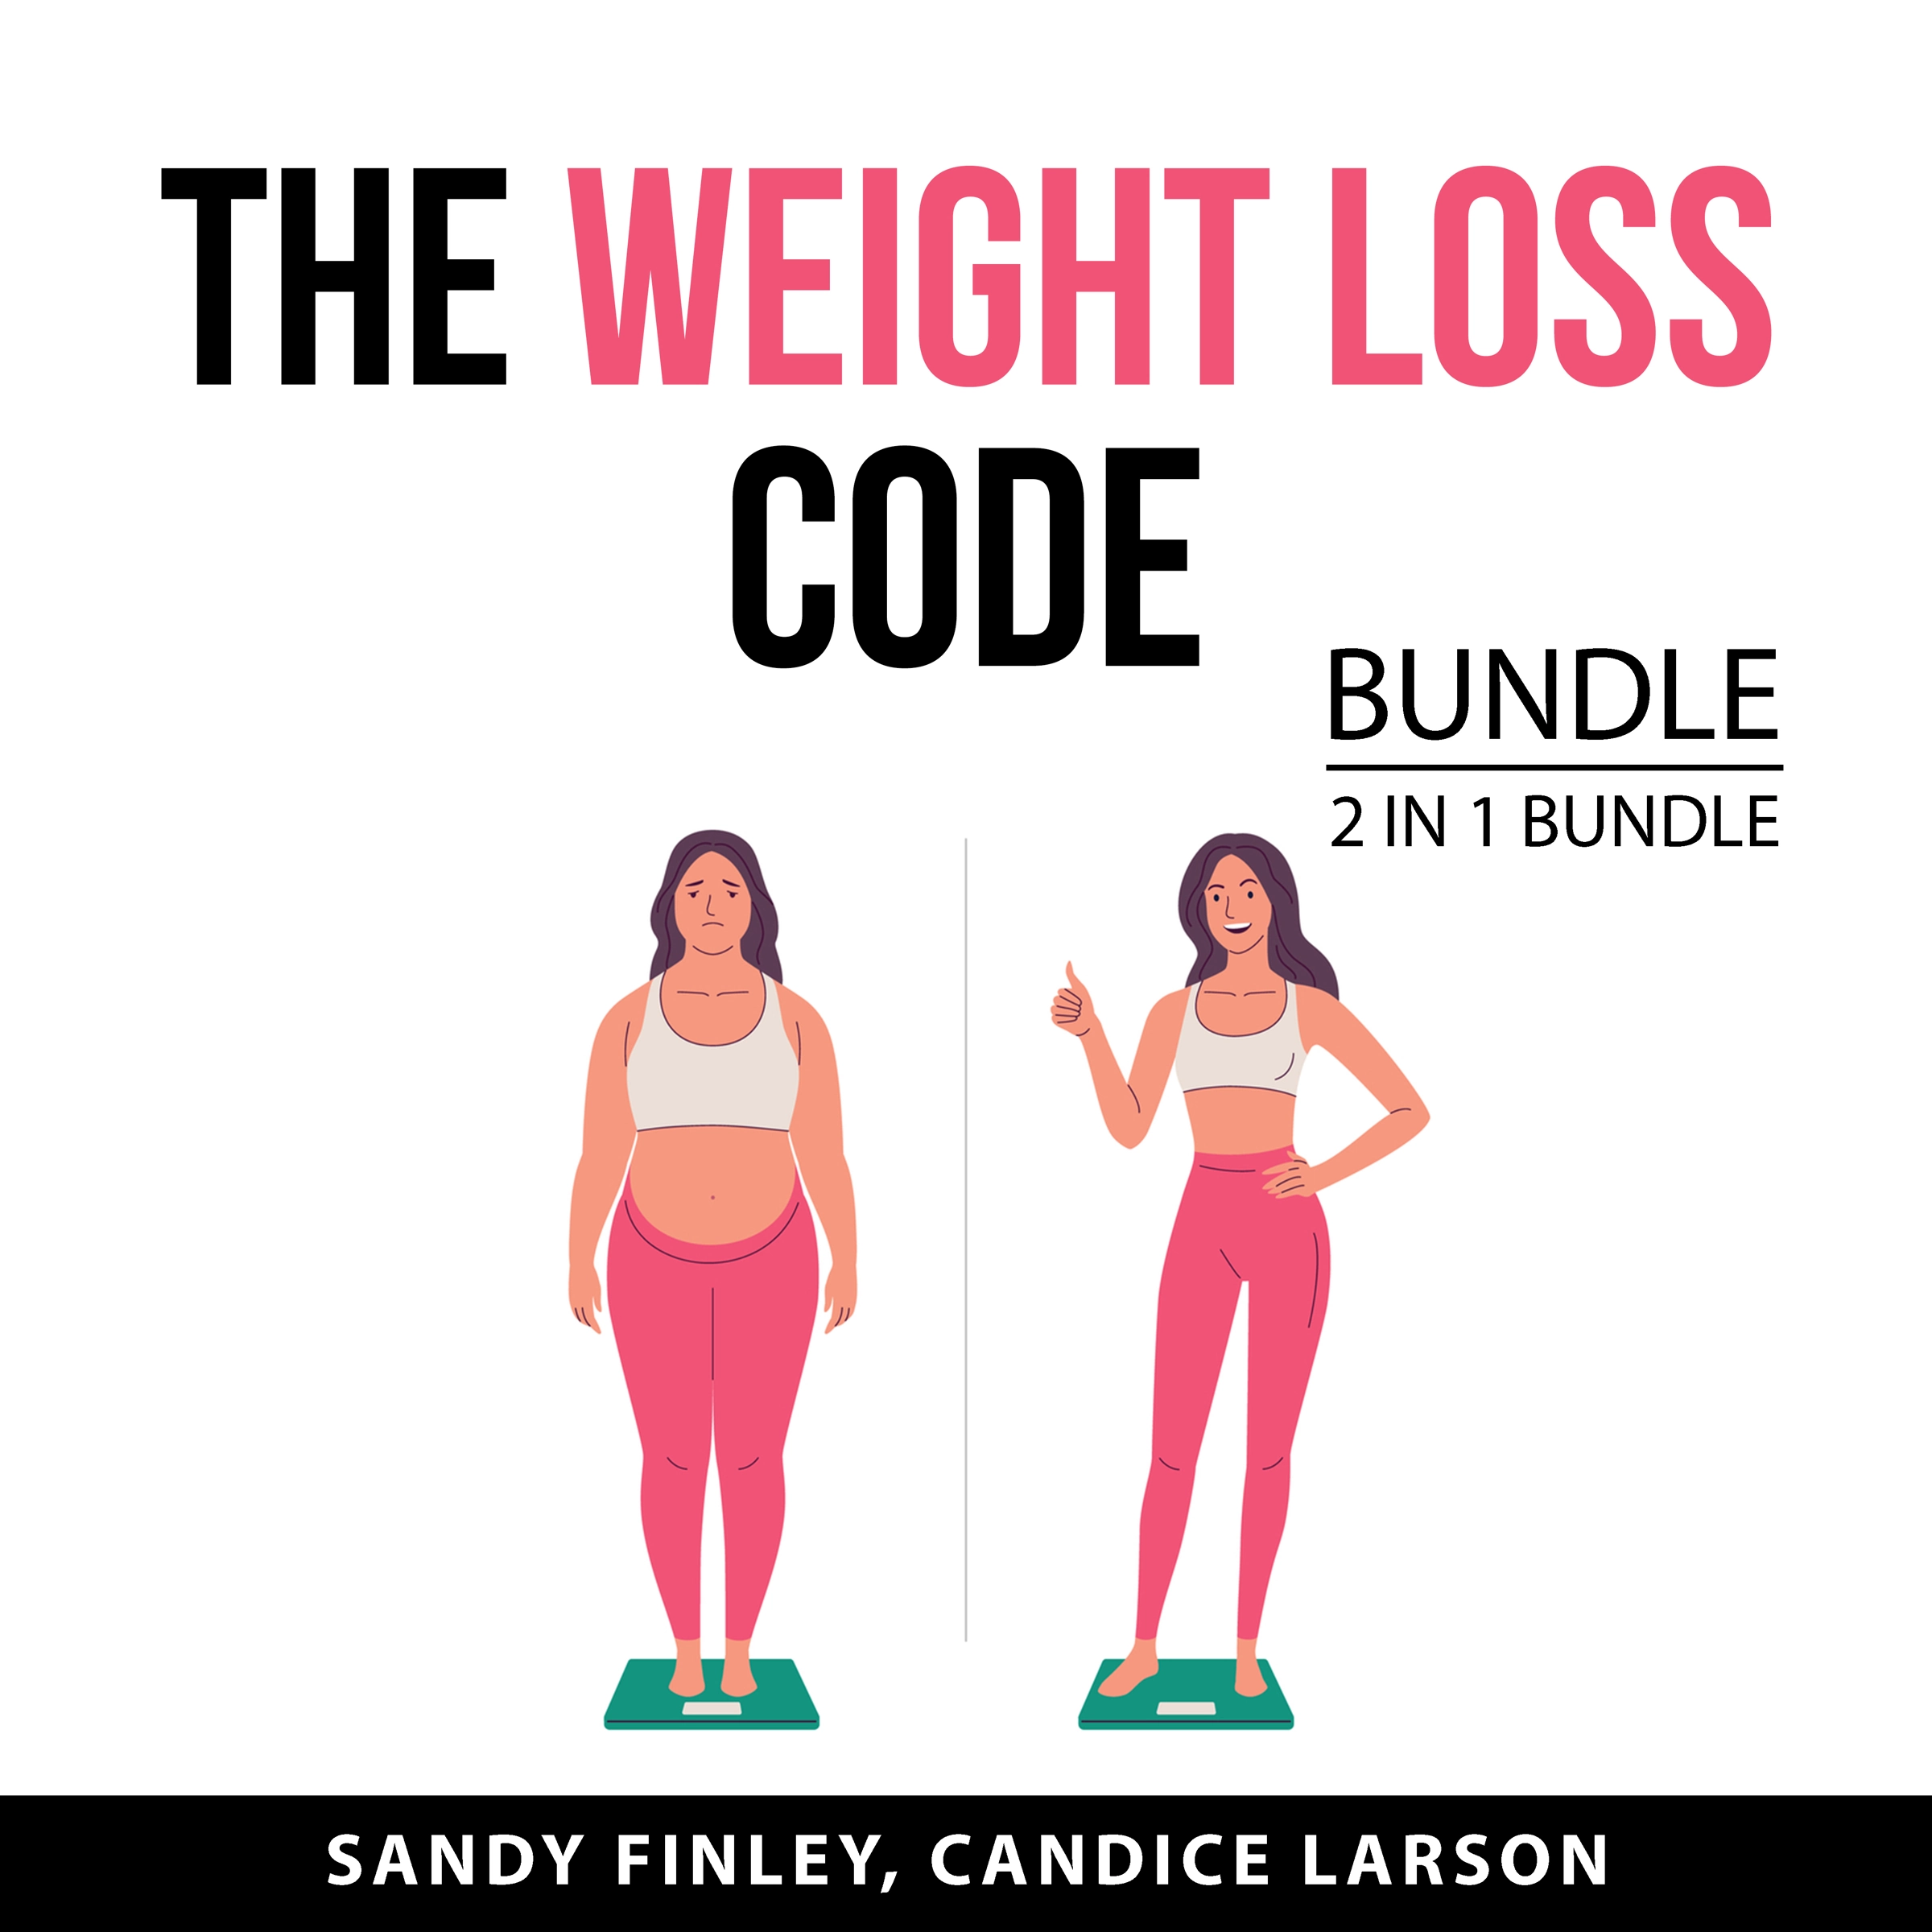 The Weight Loss Code Bundle, 2 in 1  Bundle Audiobook by Candice Larson